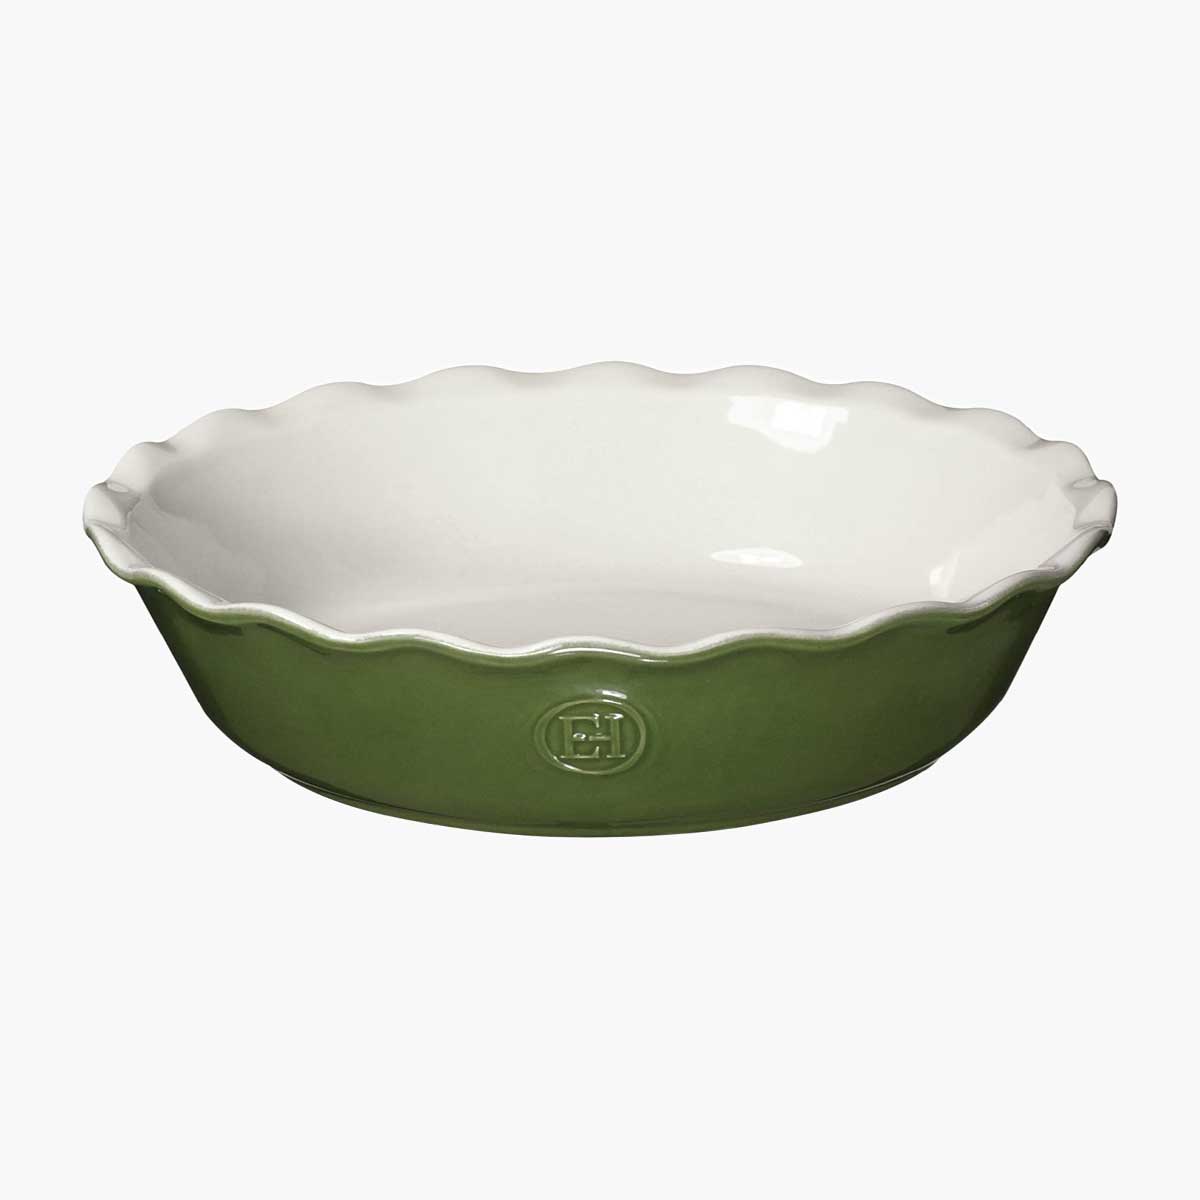 A green Emile Henry pie plate, as part of Kate McDermott's favorite kitchen things.